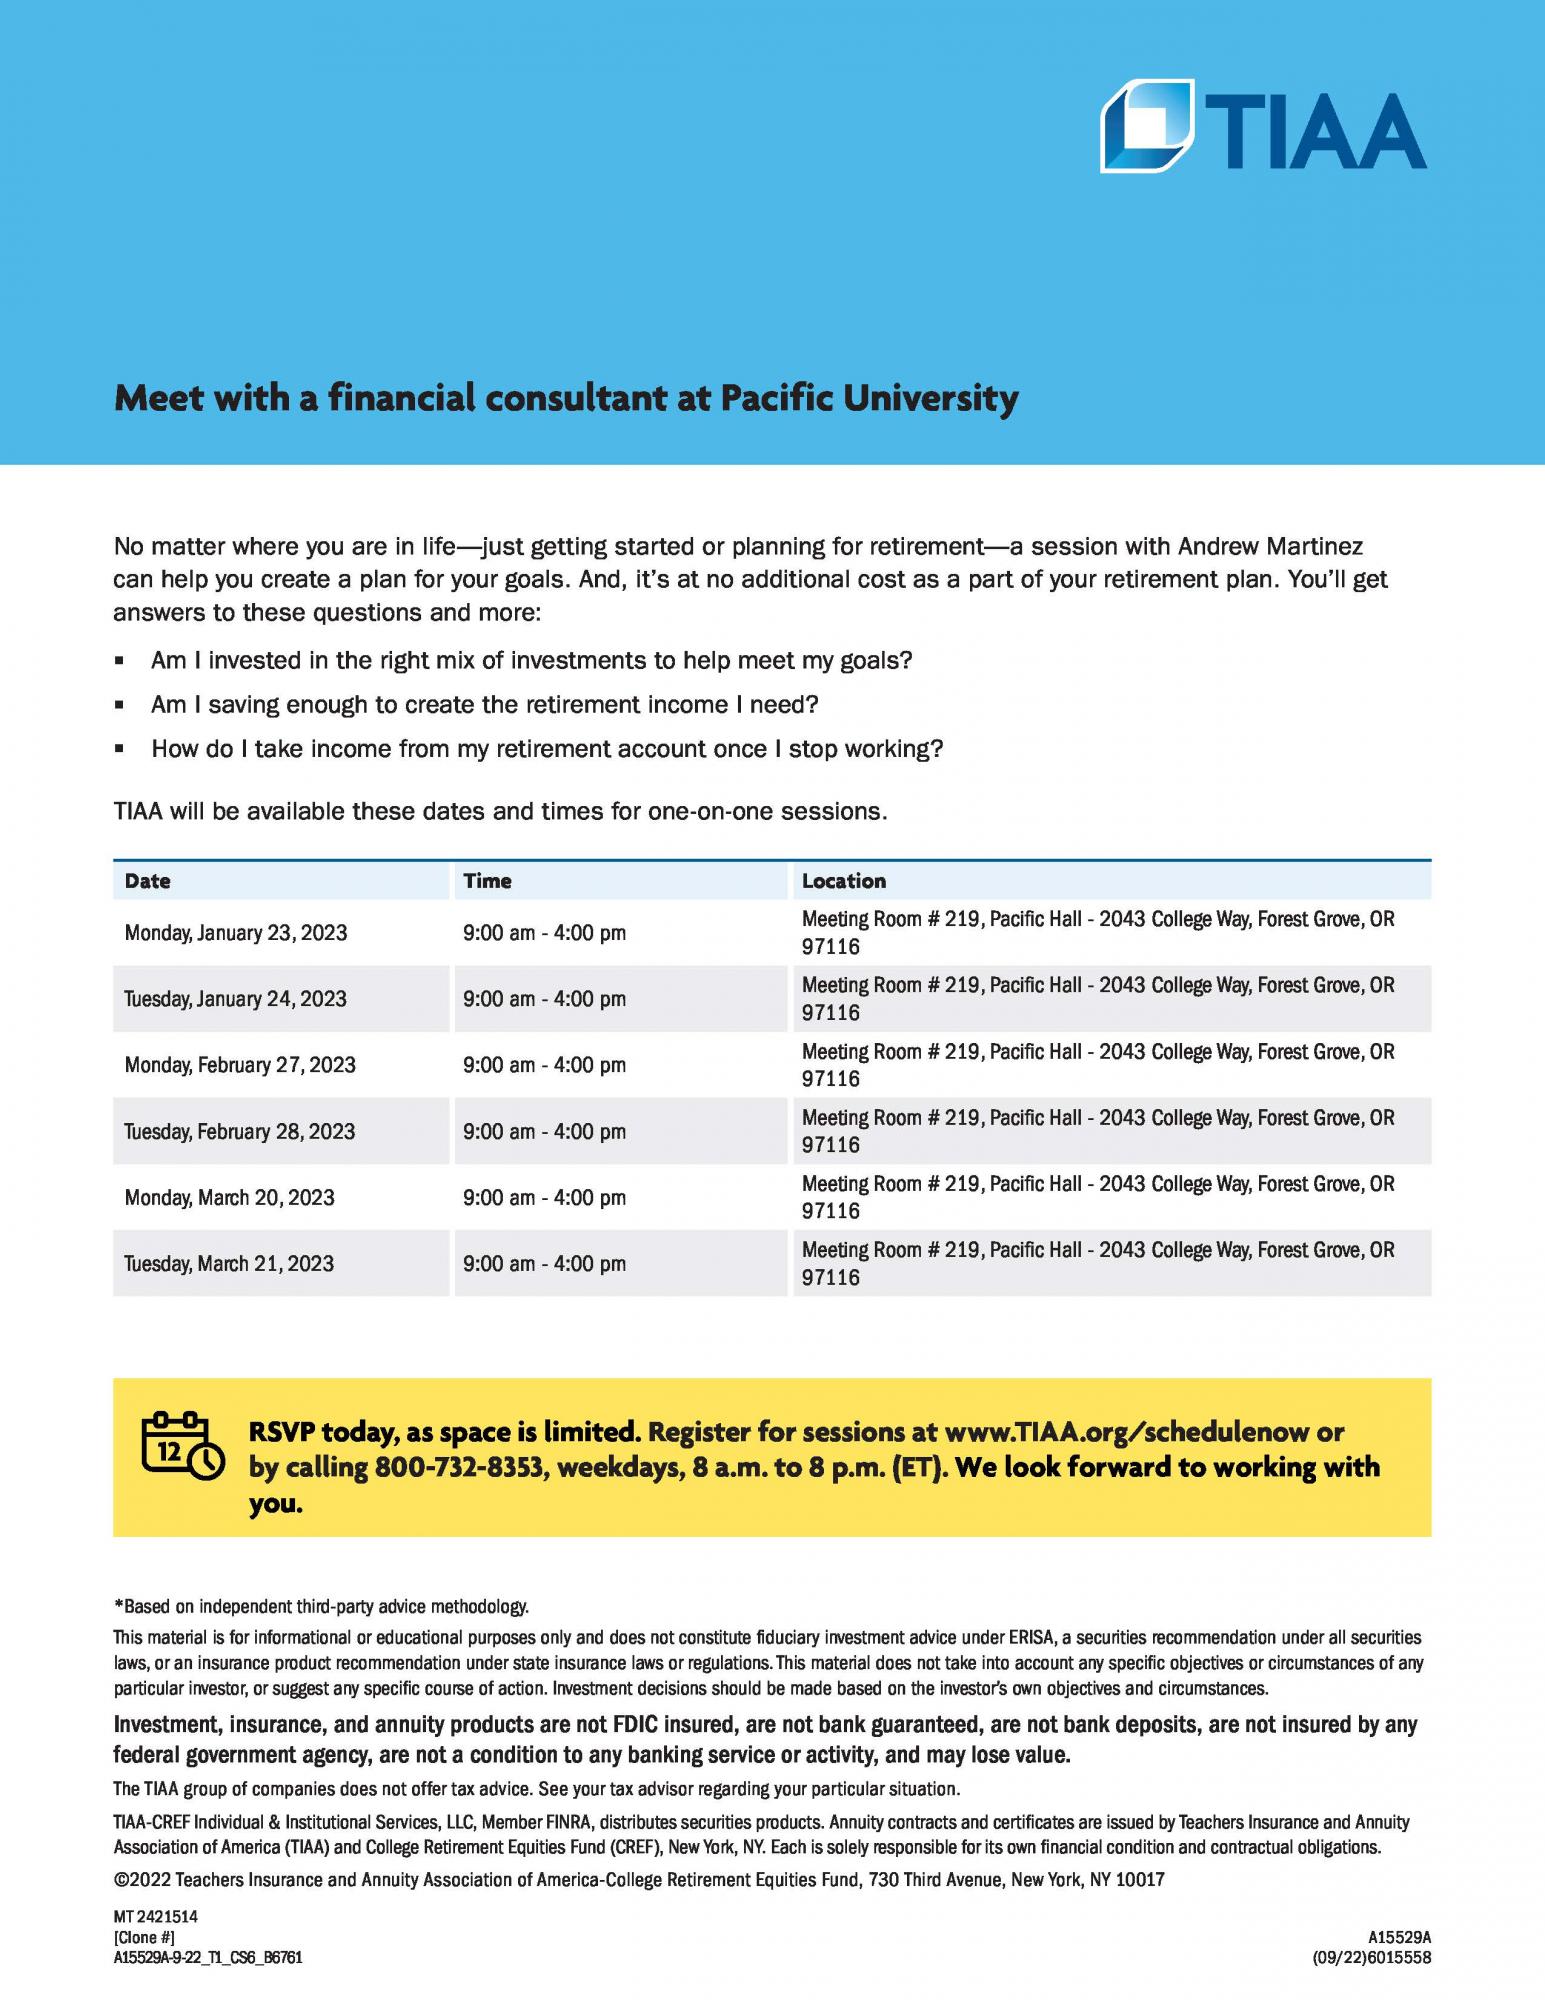 Invitation Flyer for TIAA Financial Consultant Scheduling